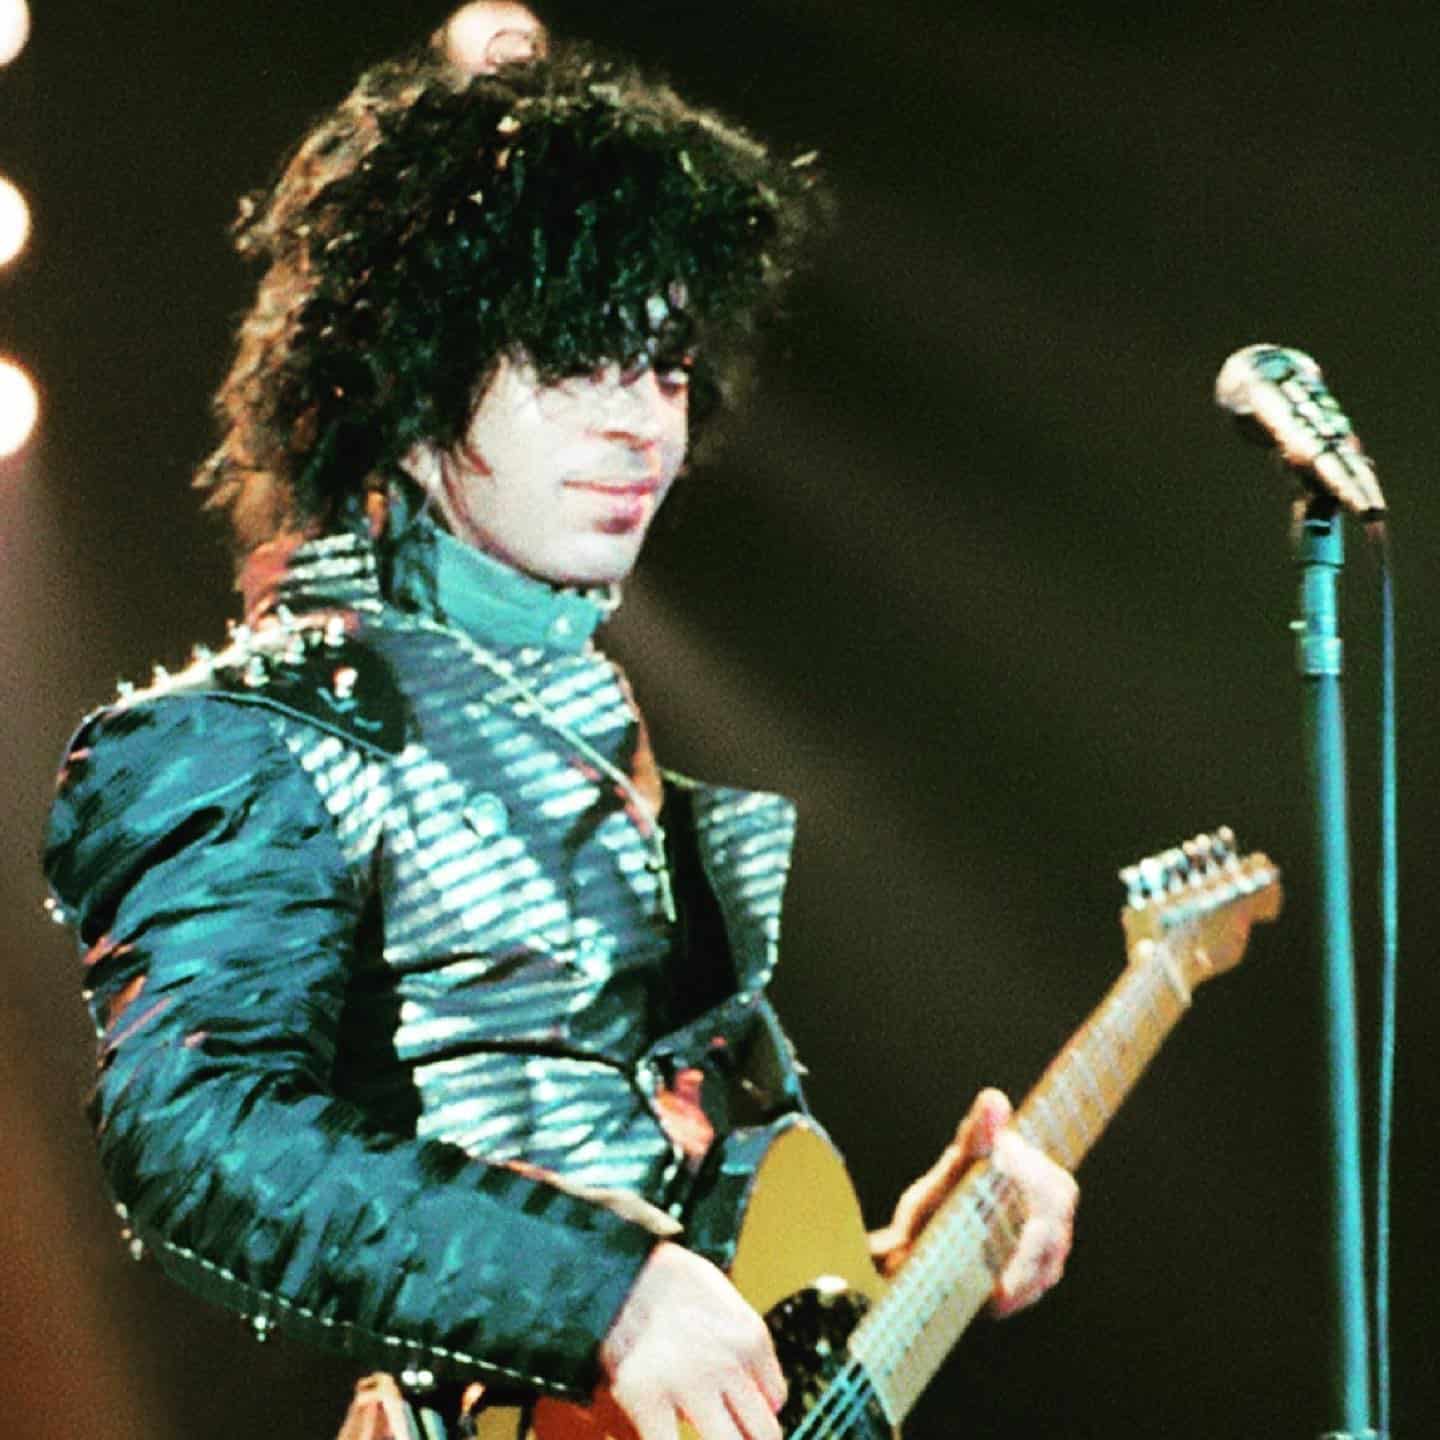 prince playing the guitar in a concert